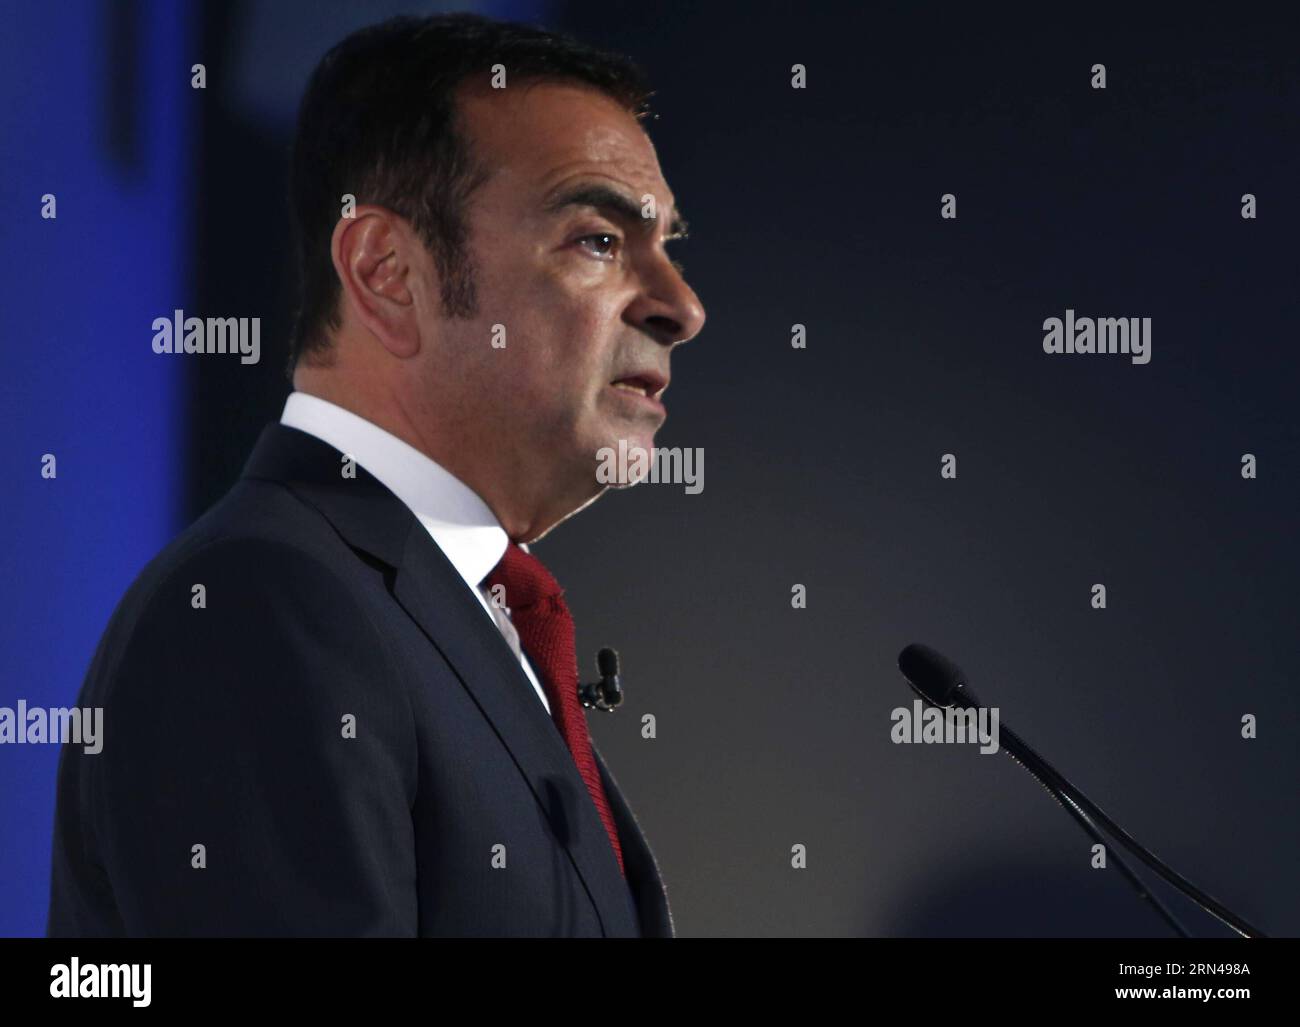 YOKOHAMA, May 13, 2015 -- Nissan Motors Chairman and CEO Carlos Ghosn speaks during a news conference to announce their financial results for the 12 months to March 31, 2015 in Yokohama, near Tokyo, Japan, May 13, 2015. Nissan said operating profit rose to 589.6 billion yen for fiscal year 2014, representing a 5.2% margin on net revenues that reached 11.38 trillion yen (about 94.98 billion U.S. dollars) for the period. )(azp) JAPAN-YOKOHAMA-NISSAN-FY 2014 Stringer PUBLICATIONxNOTxINxCHN   Yokohama May 13 2015 Nissan Engine Chairman and CEO Carlos Ghosn Speaks during a News Conference to Announ Stock Photo